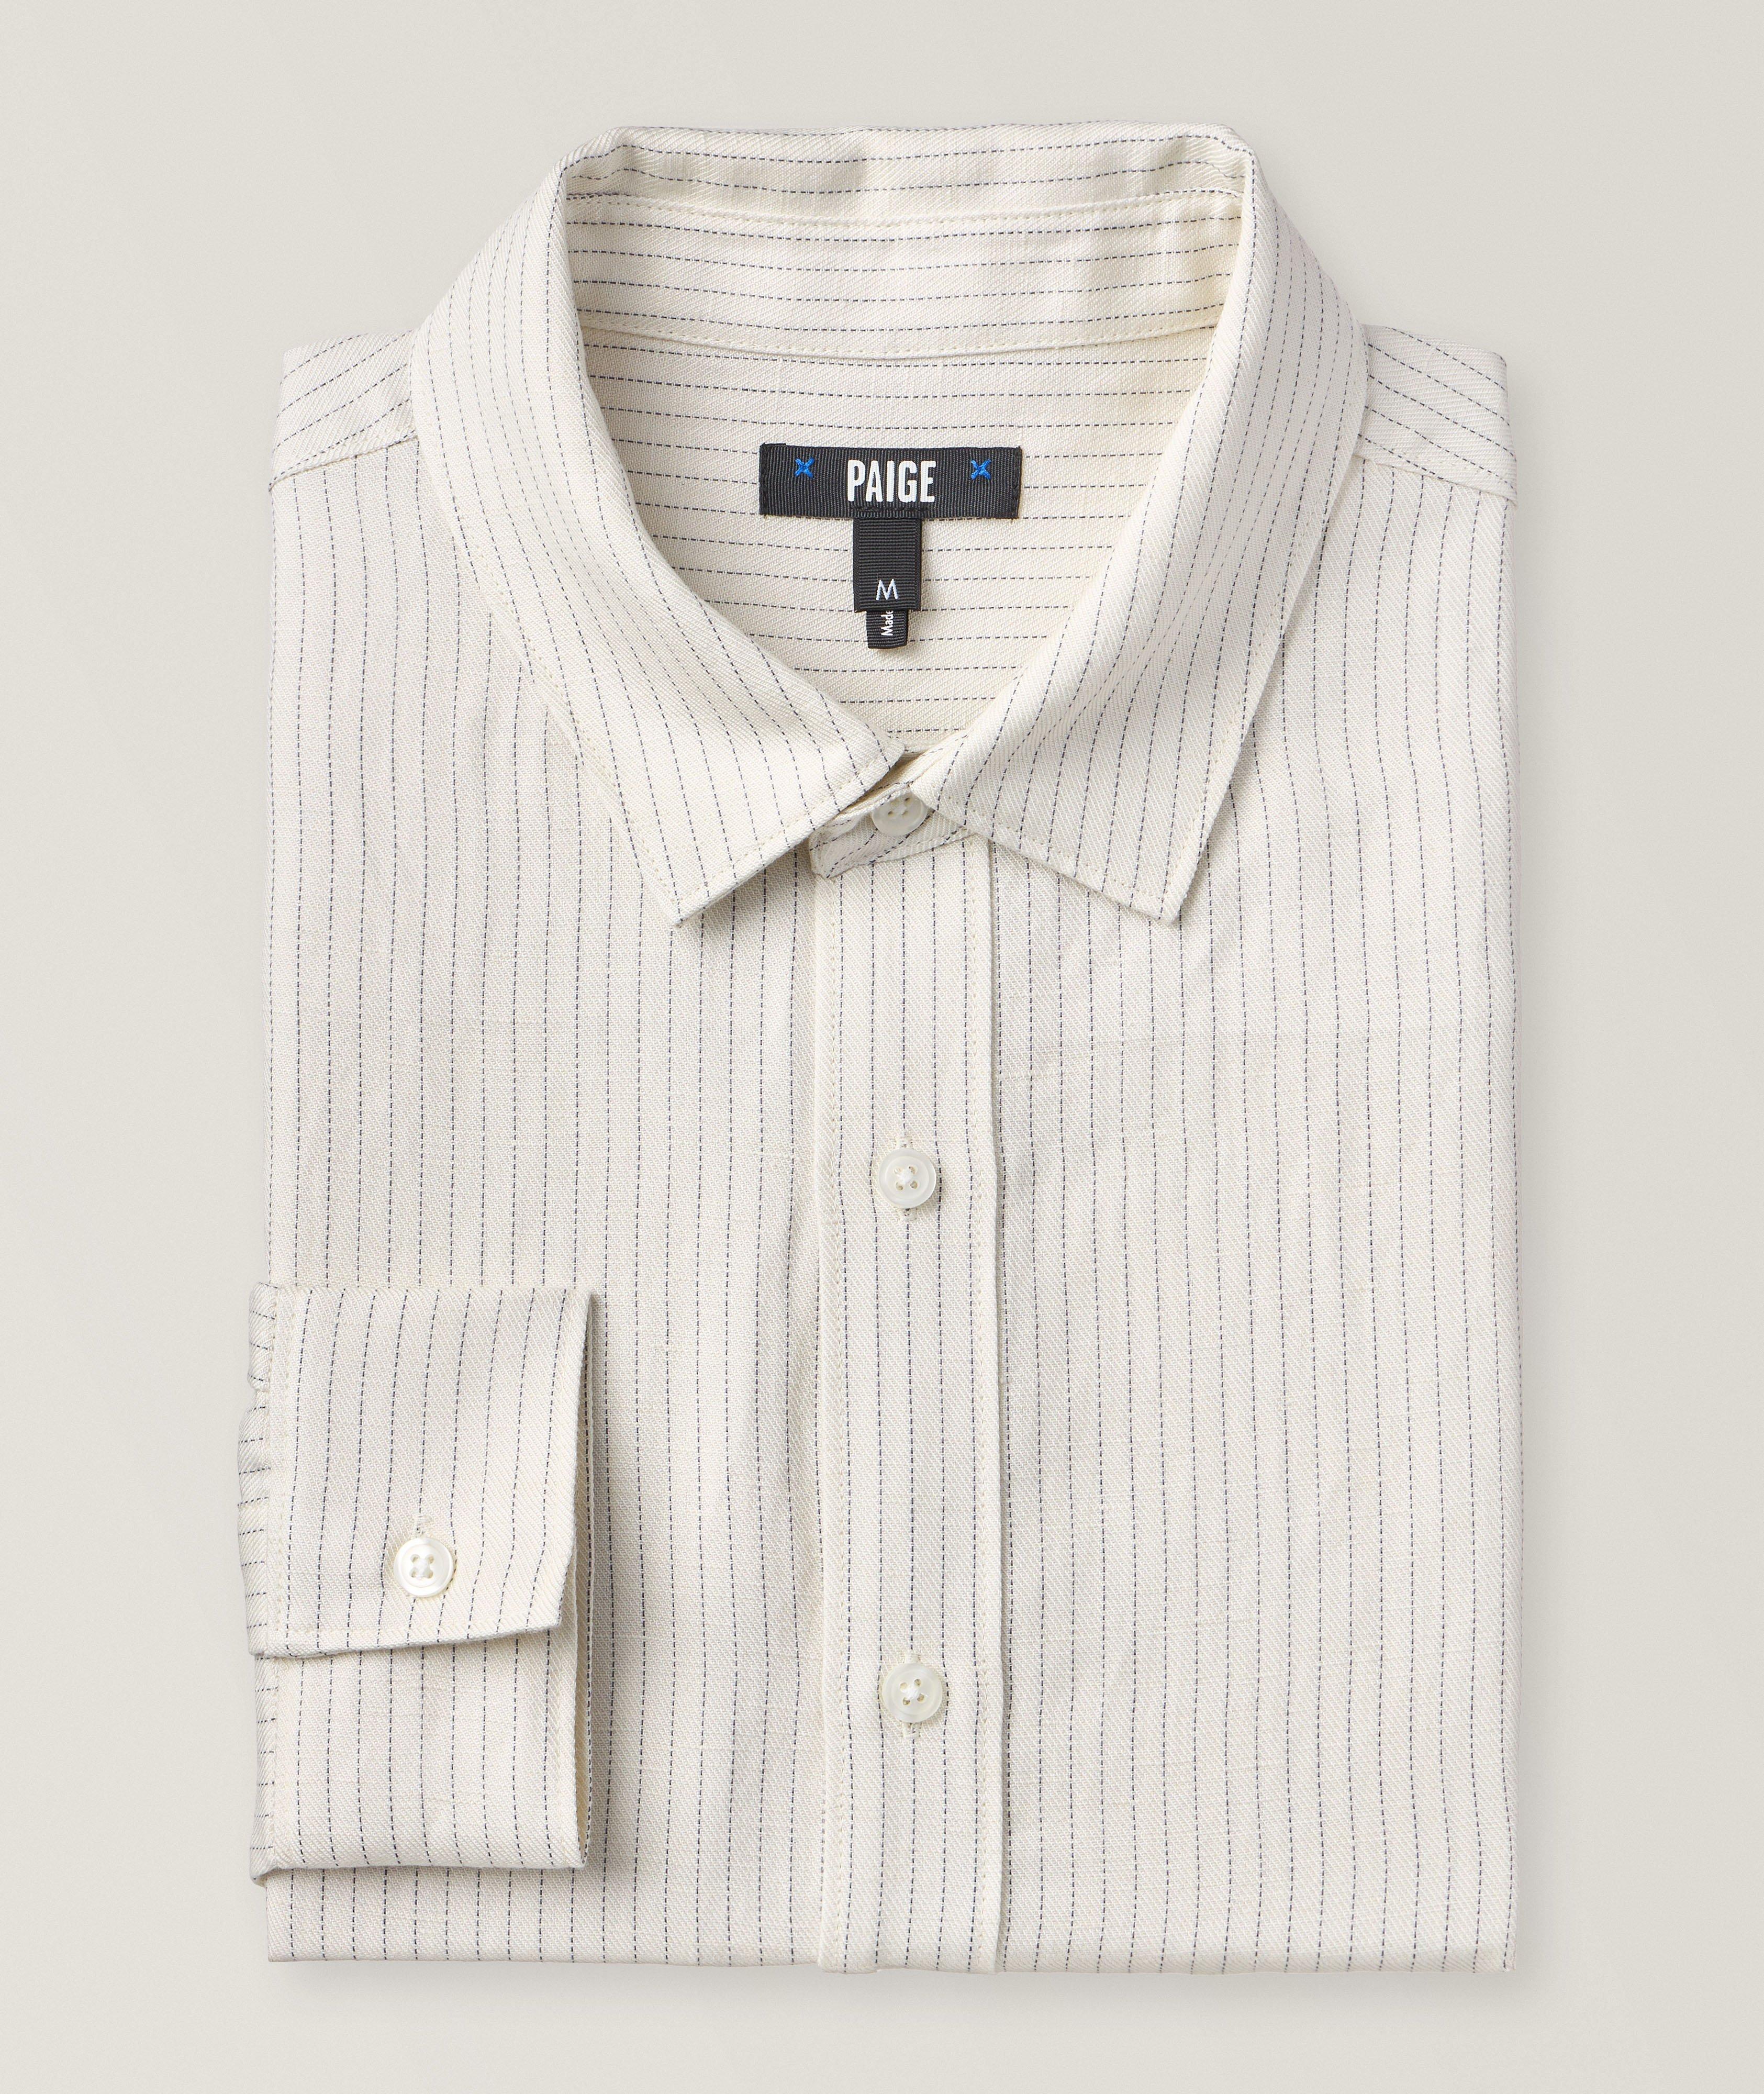 Peters Striped Sport Shirt image 0